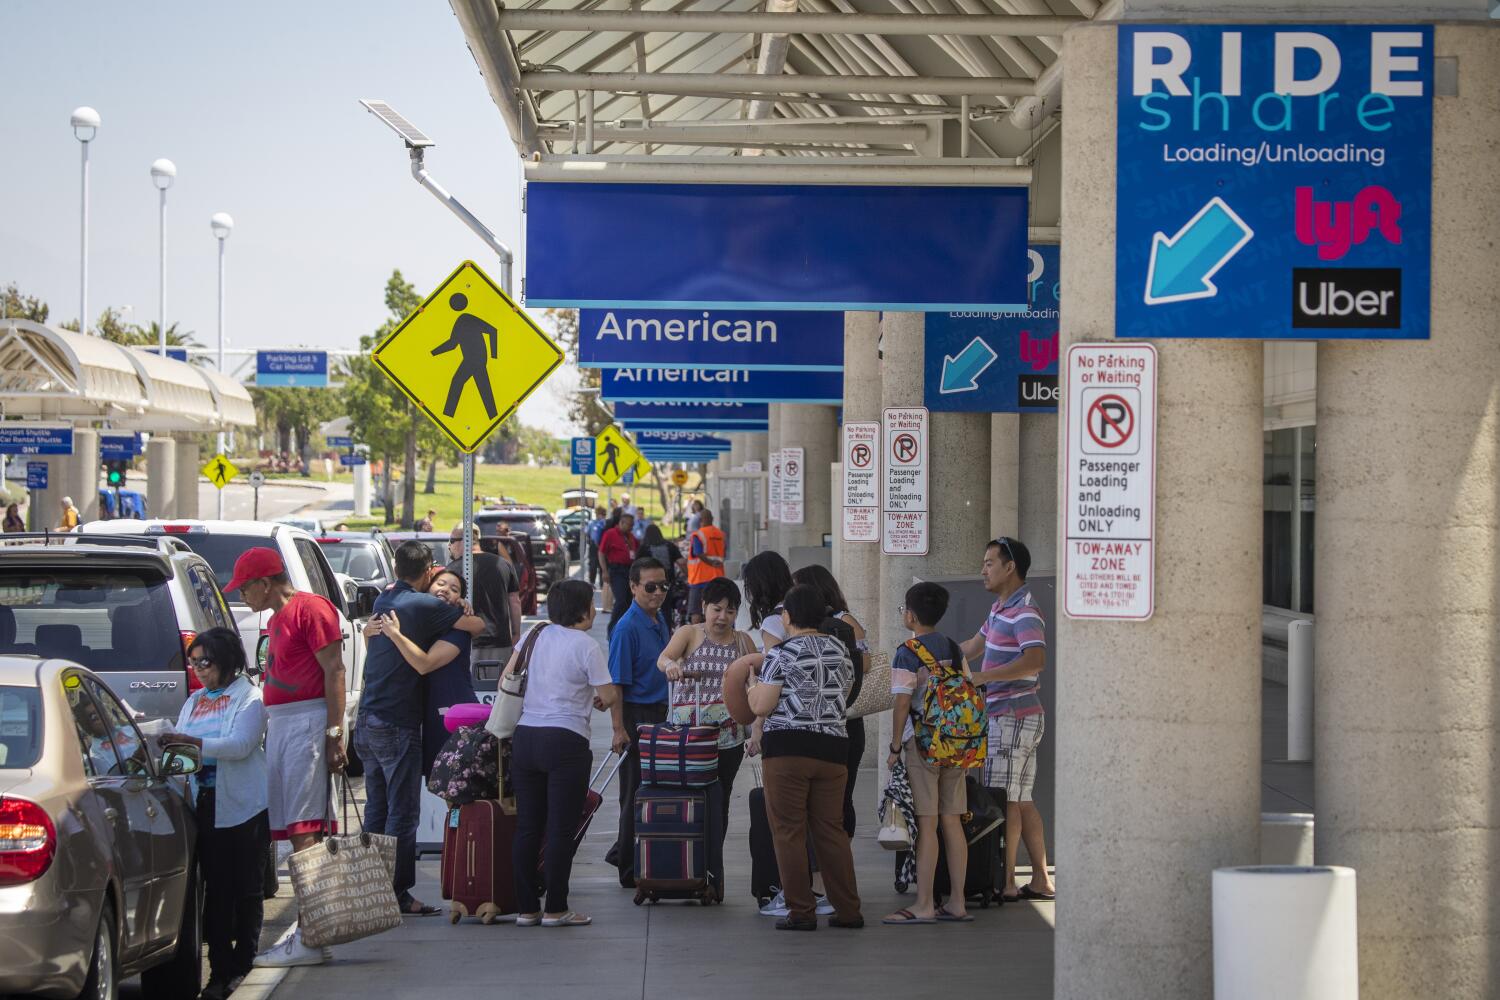 Summer airline travelers expect to face a Fourth of July holiday crush. LAX among the busiest